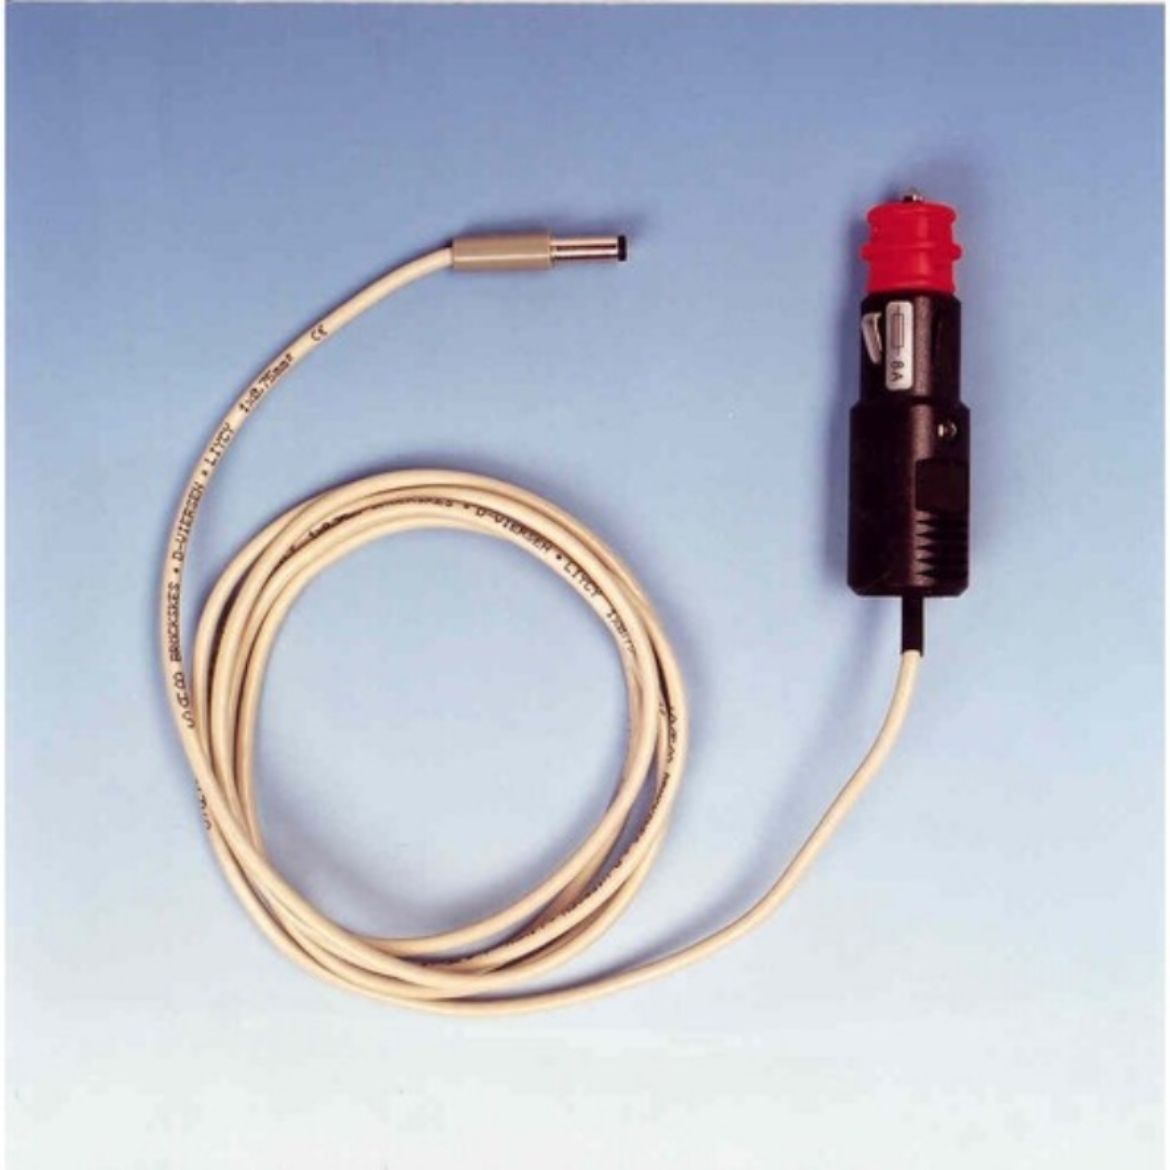 Picture of VEHICLE CABLE 12 V FOR ALCOTEST 7410 AND ANALYZER DRÄGER DRUGTEST 5000